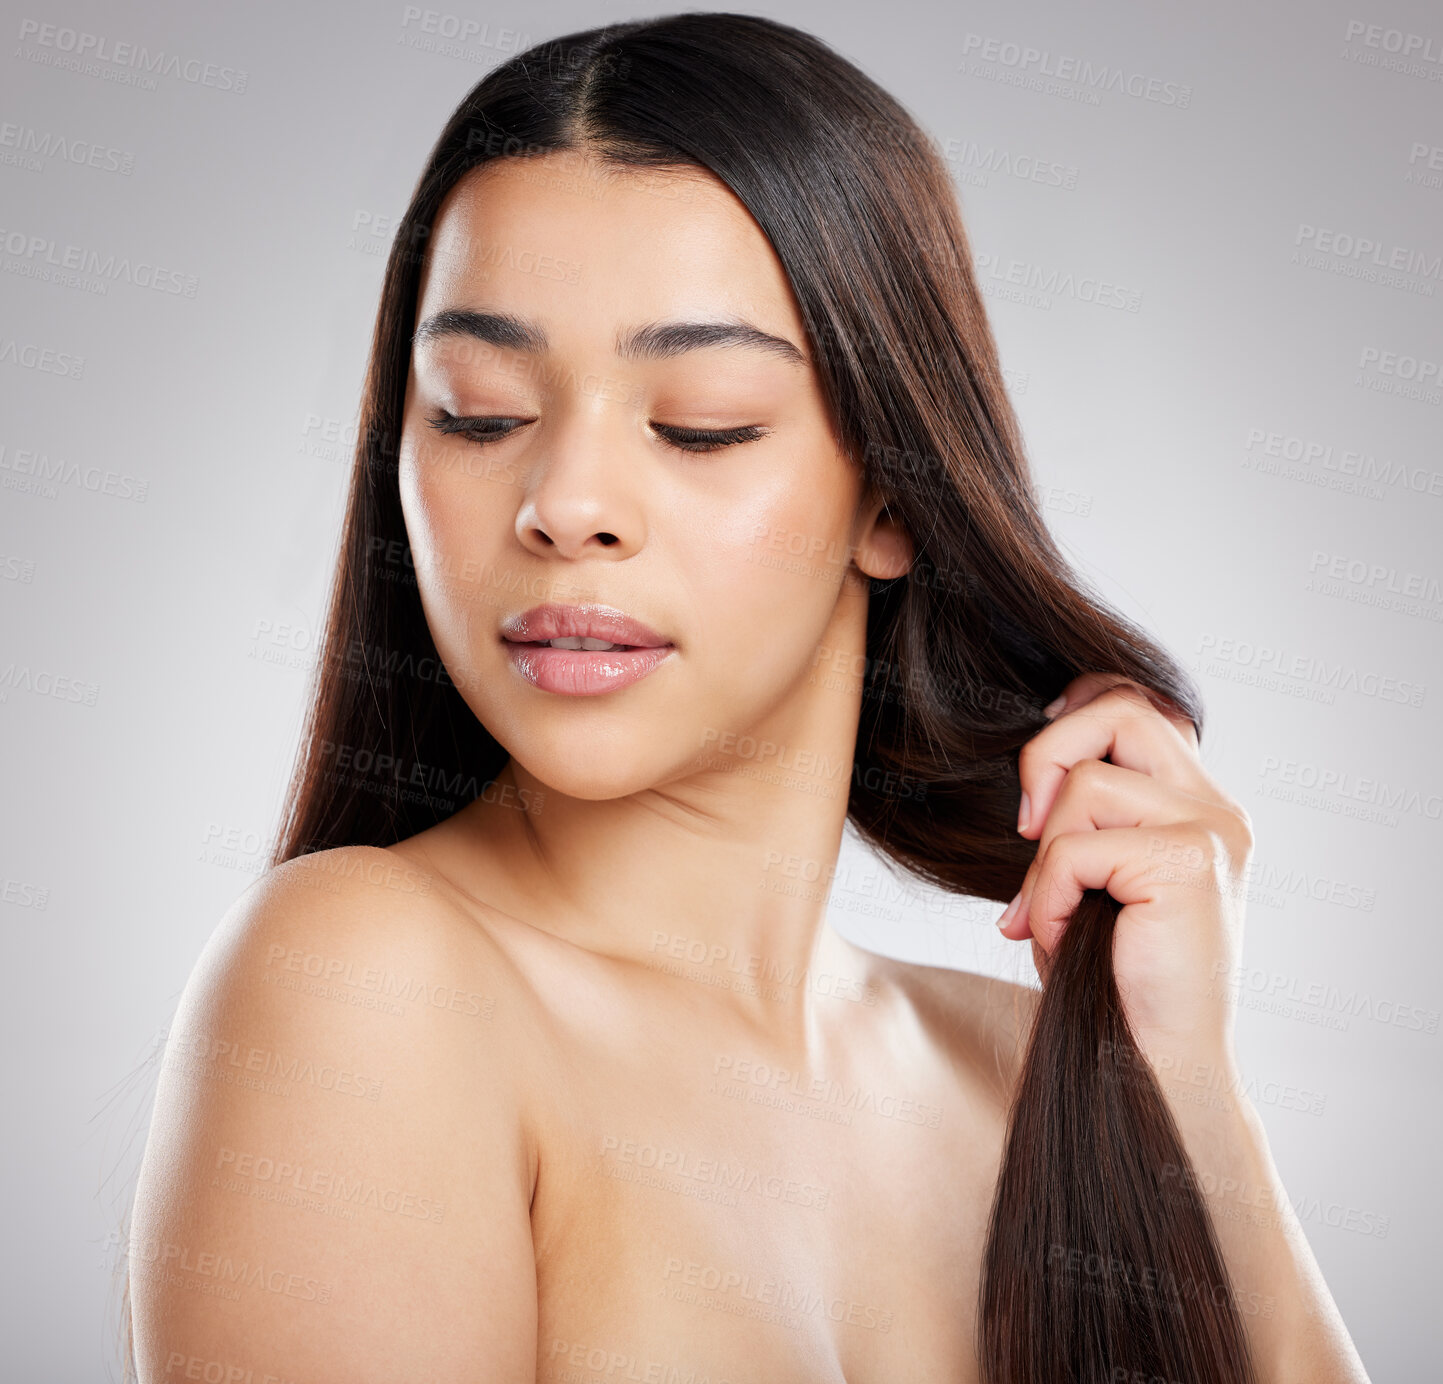 Buy stock photo Studio shot of an attractive young woman holding her hair against a grey background